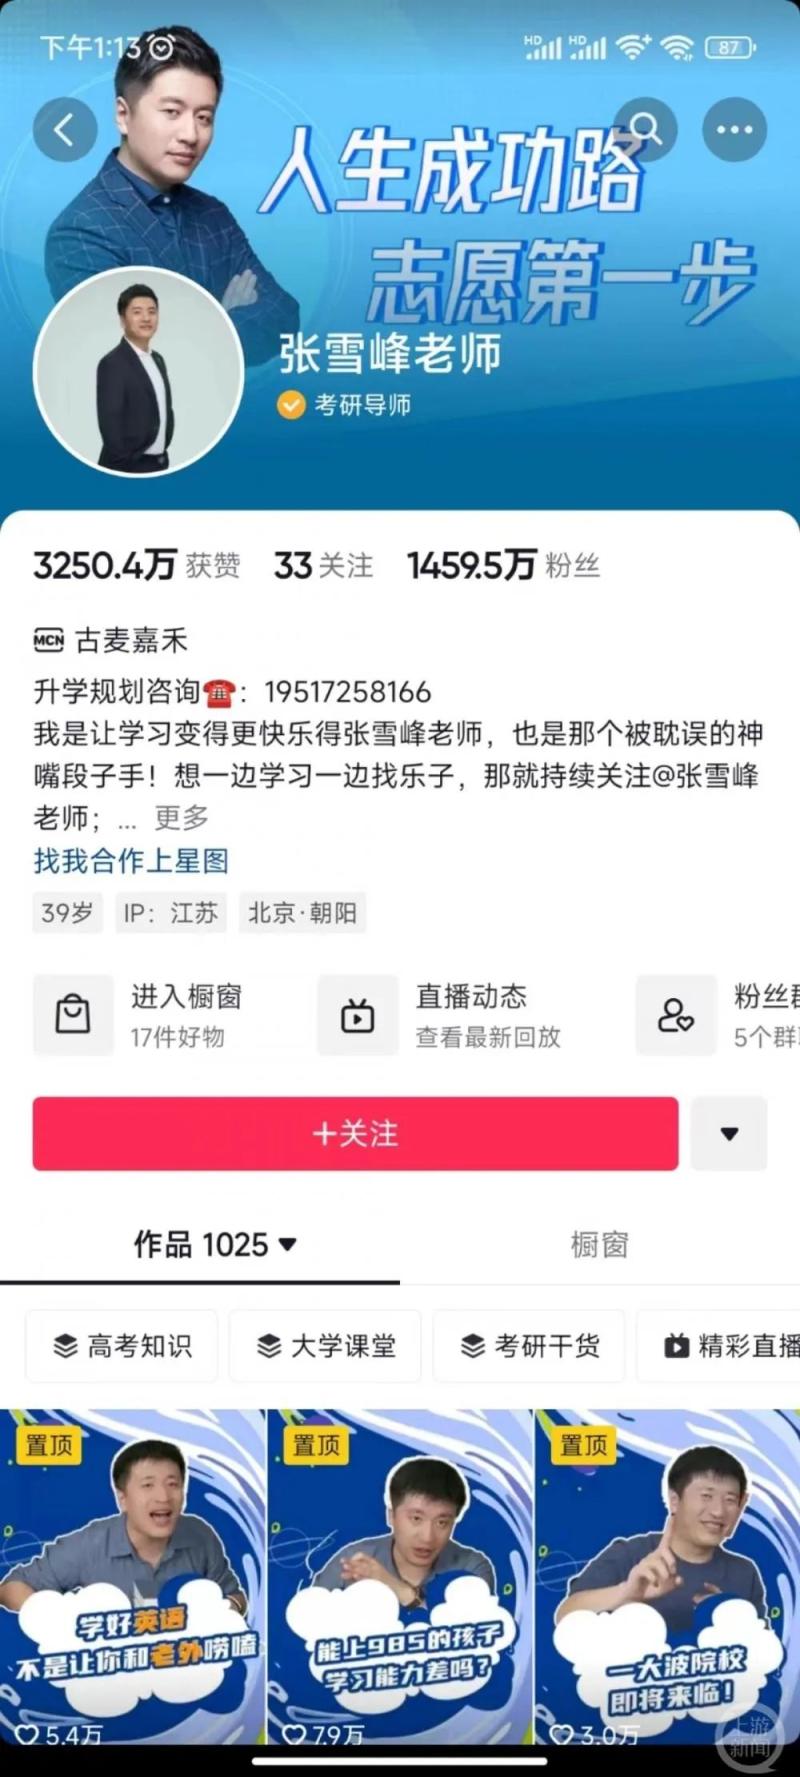 I refute the rumor!, Zhang Xuefeng was impersonated by multiple accounts | Zhang Xuefeng | Account